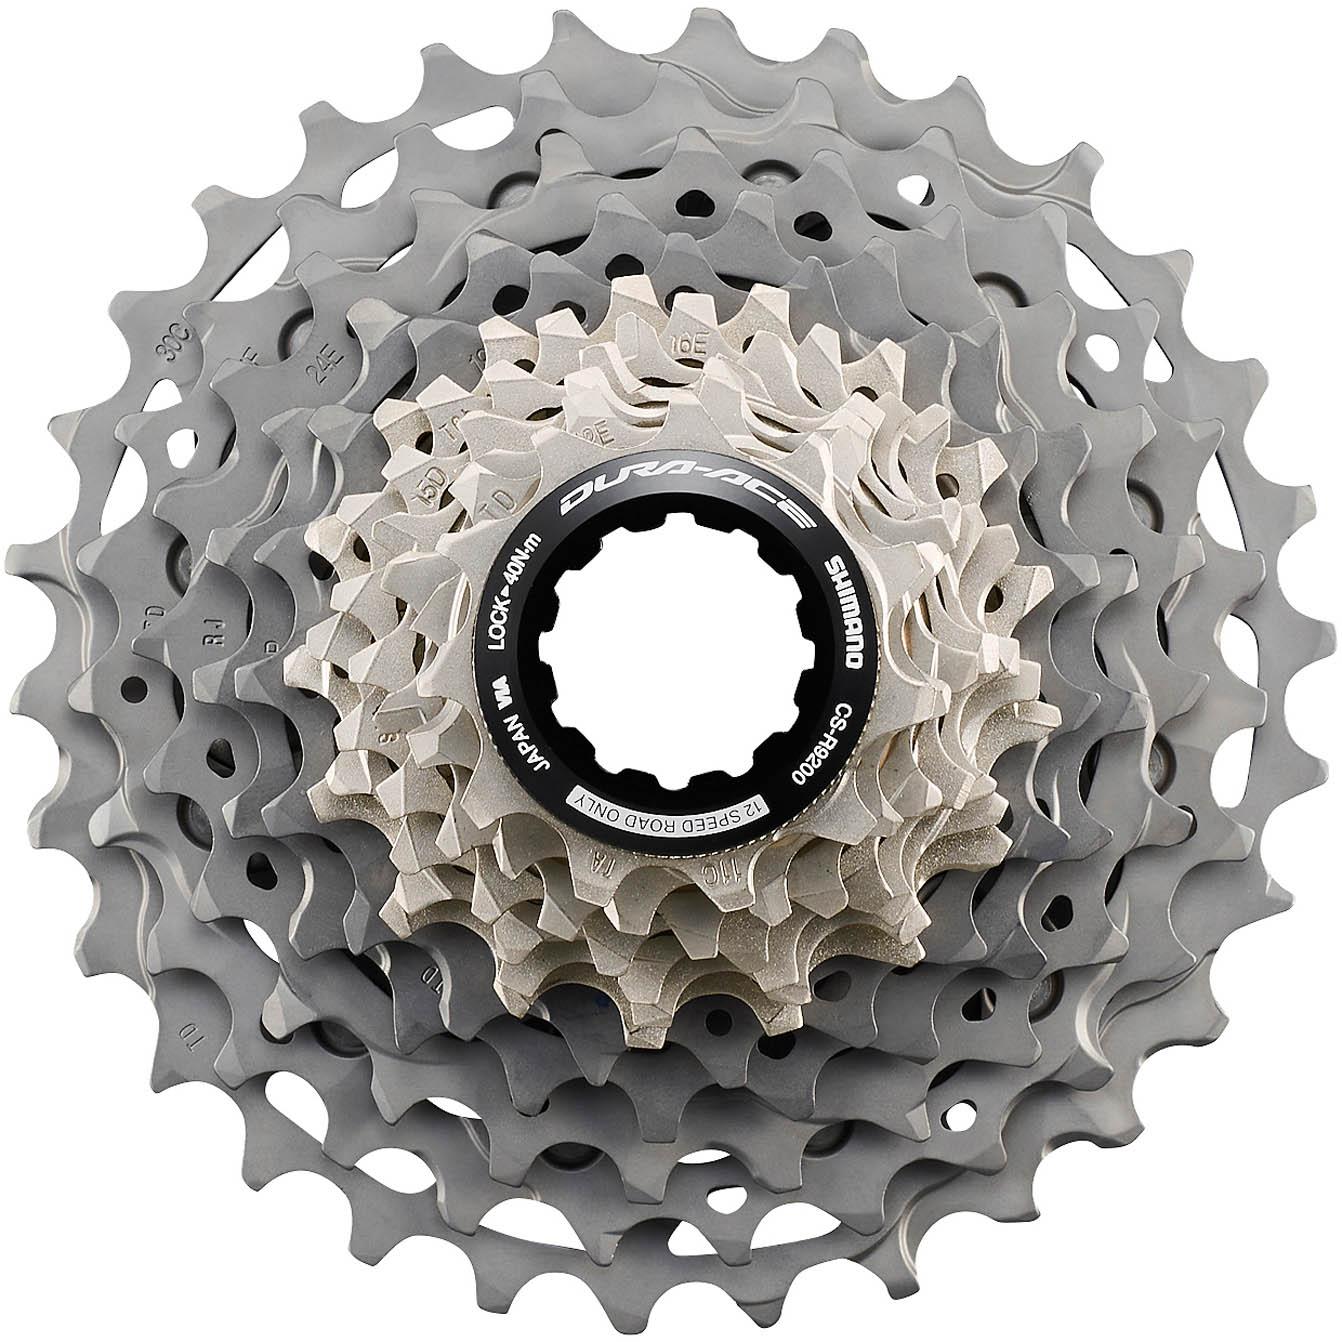 Shimano Dura-ace R9200 12 Speed Cassette - Silver